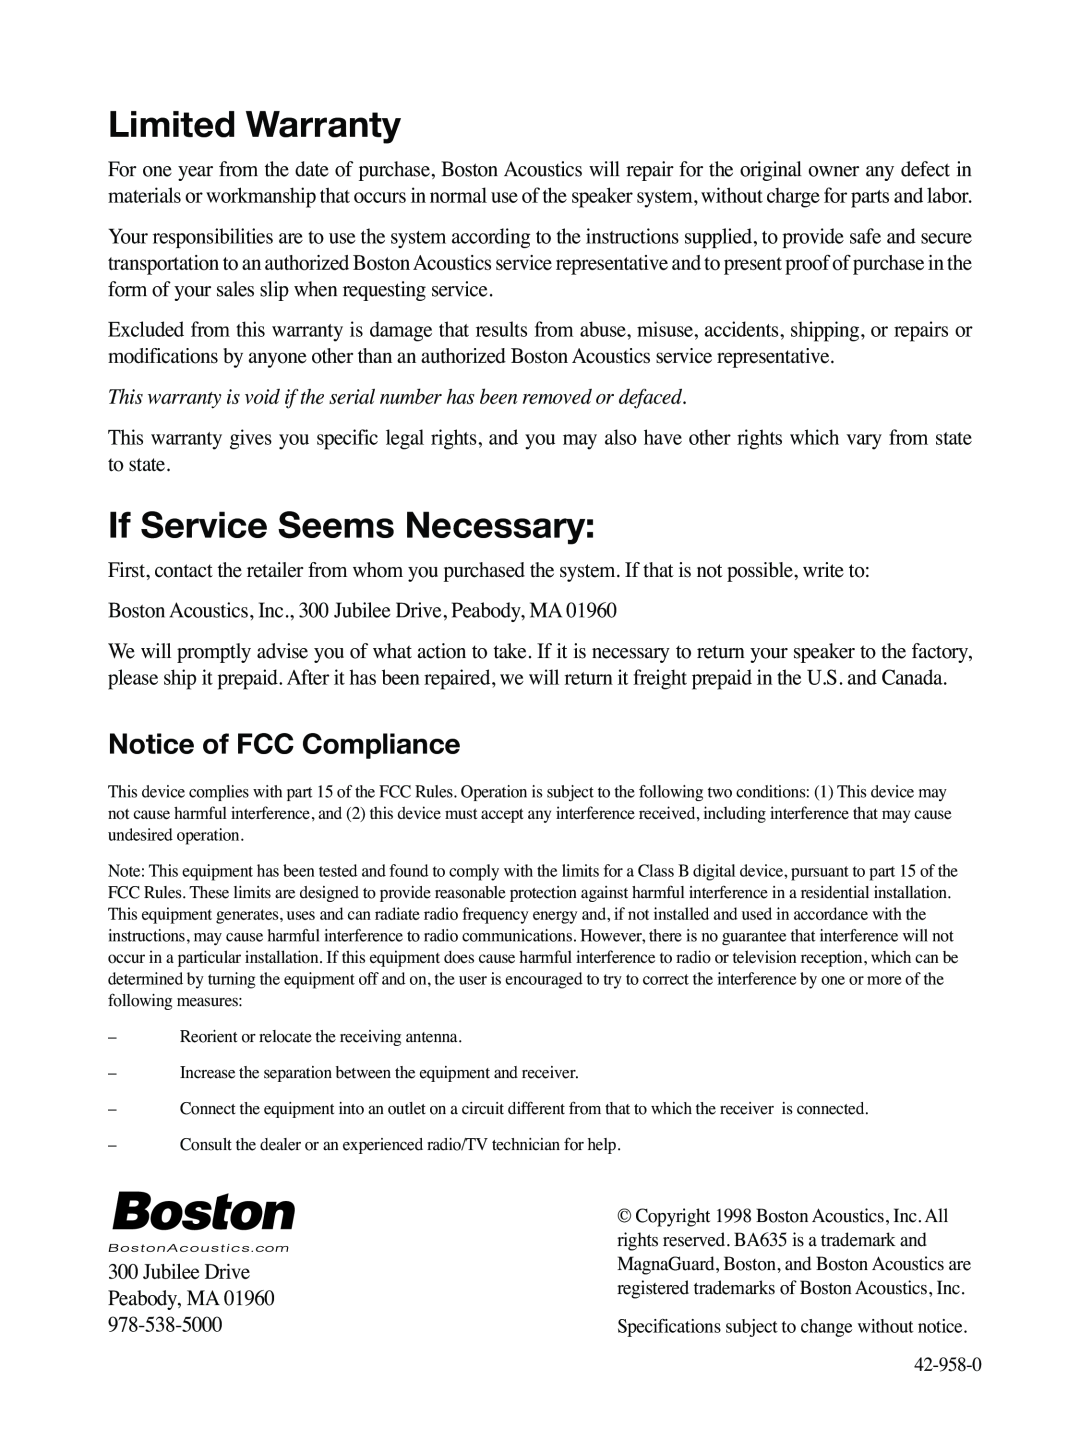 Boston Acoustics 635 manual Limited Warranty, If Service Seems Necessary, Notice of FCC Compliance 